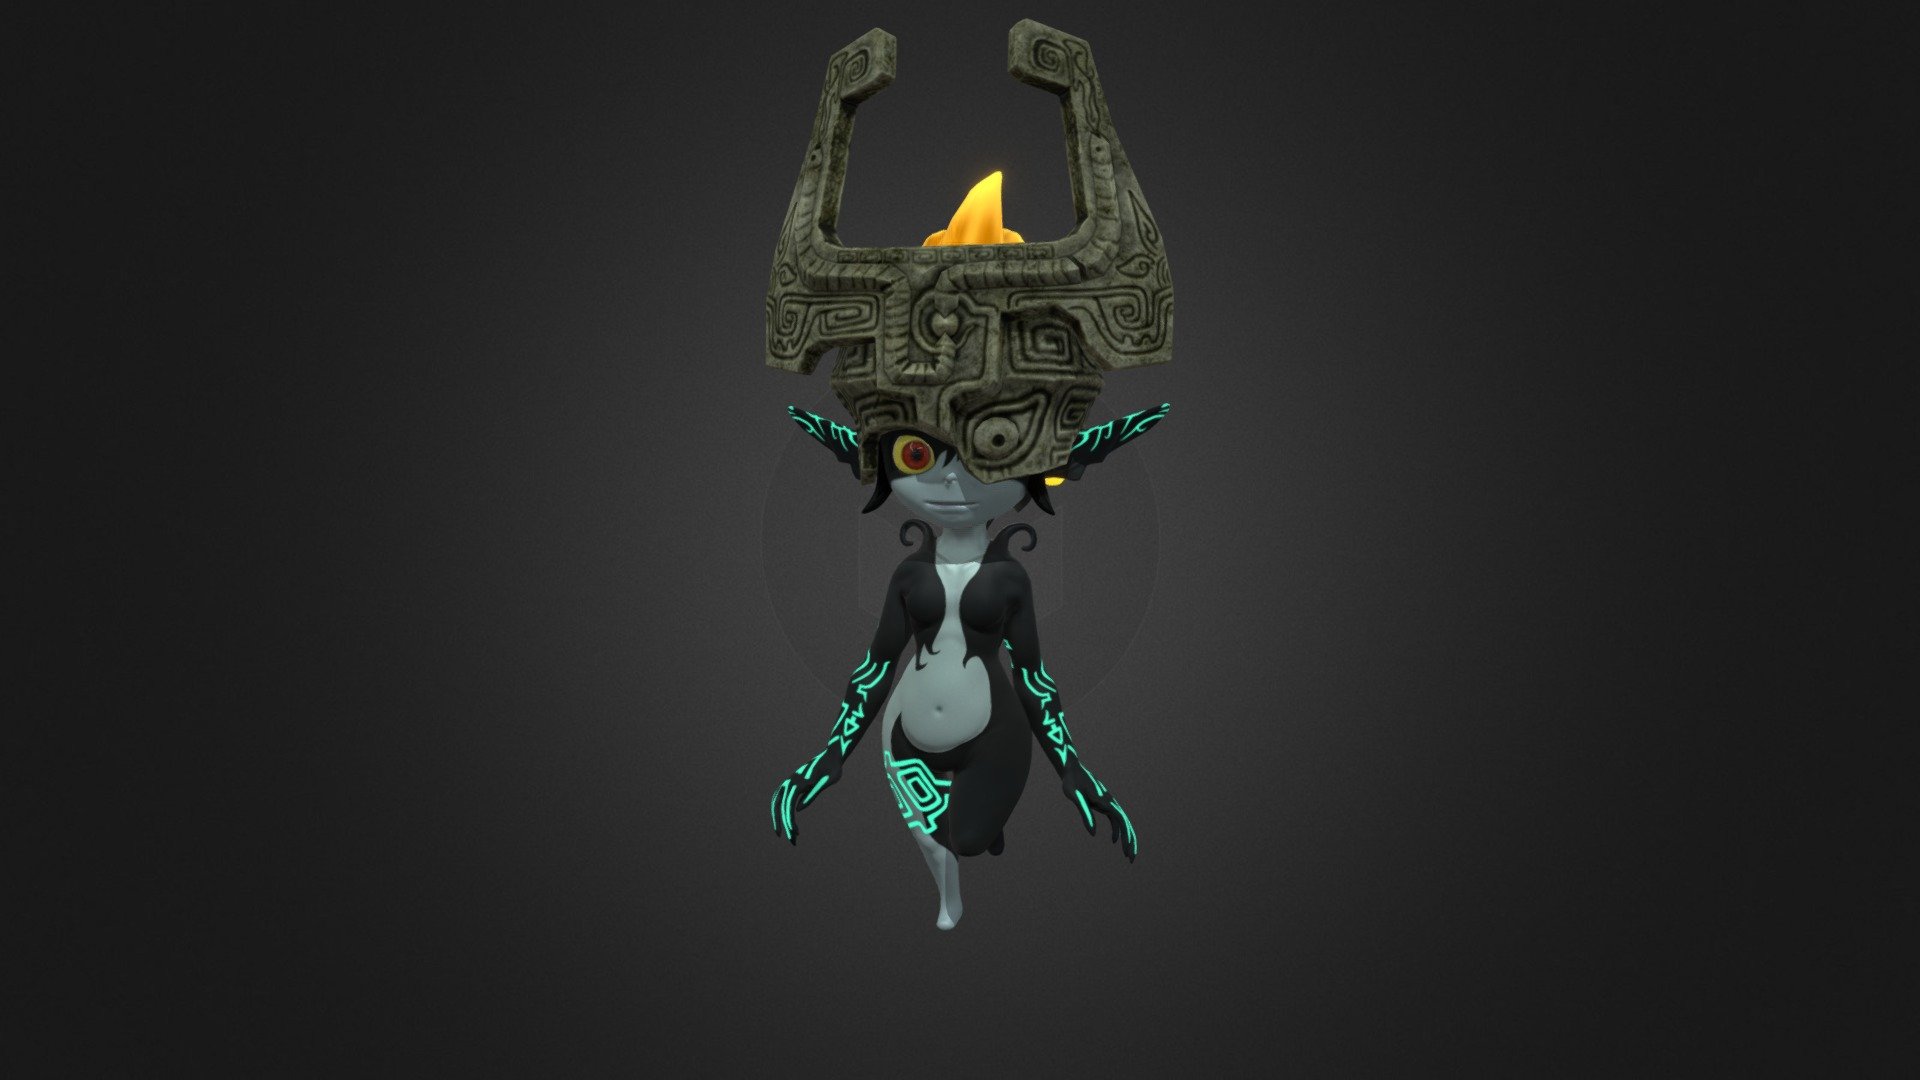 Game ready Midna from the Legend of Zelda Twilight Princess. Body sculpted in ZBrush, Helmet modeled in Maya/detailed in ZBrush, textured in Substance Painter - Midna Walk Animation - 3D model by KiwiLemonJuice (@KiwiLemonJuice_) 3d model